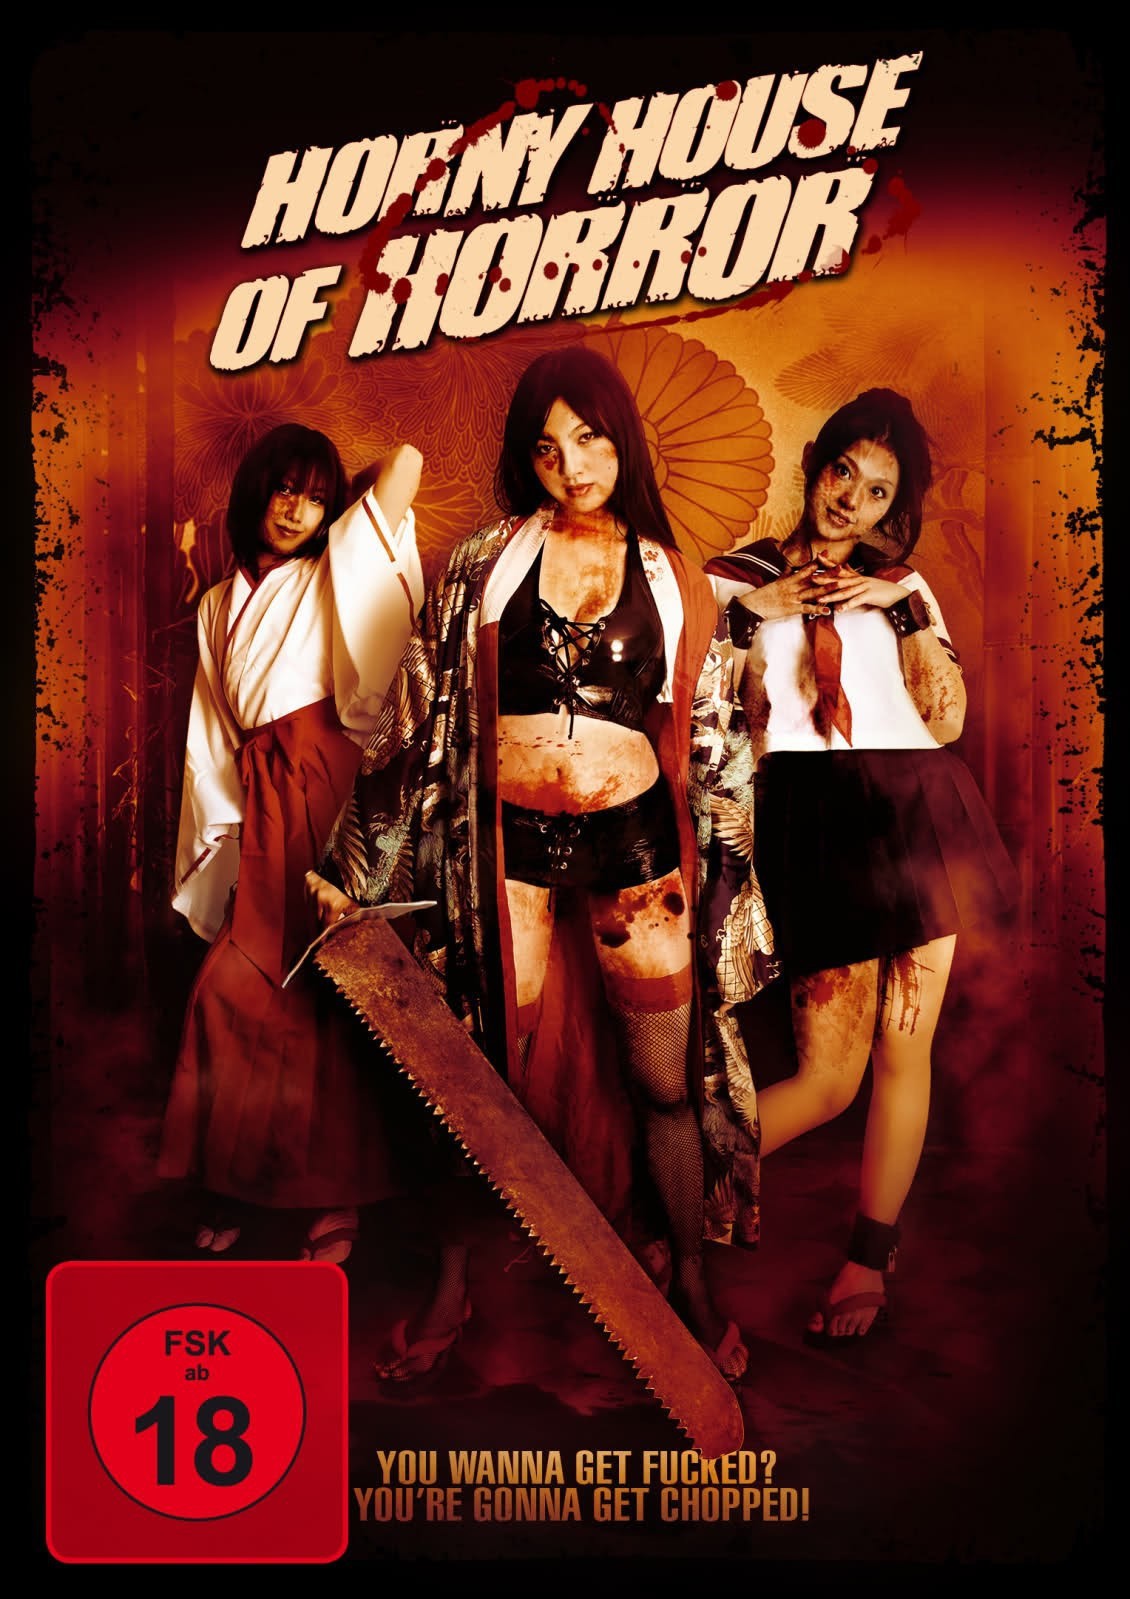 Japan Xxx Horror Movie - Watch or Download Horny House of Horror Free - PornKino